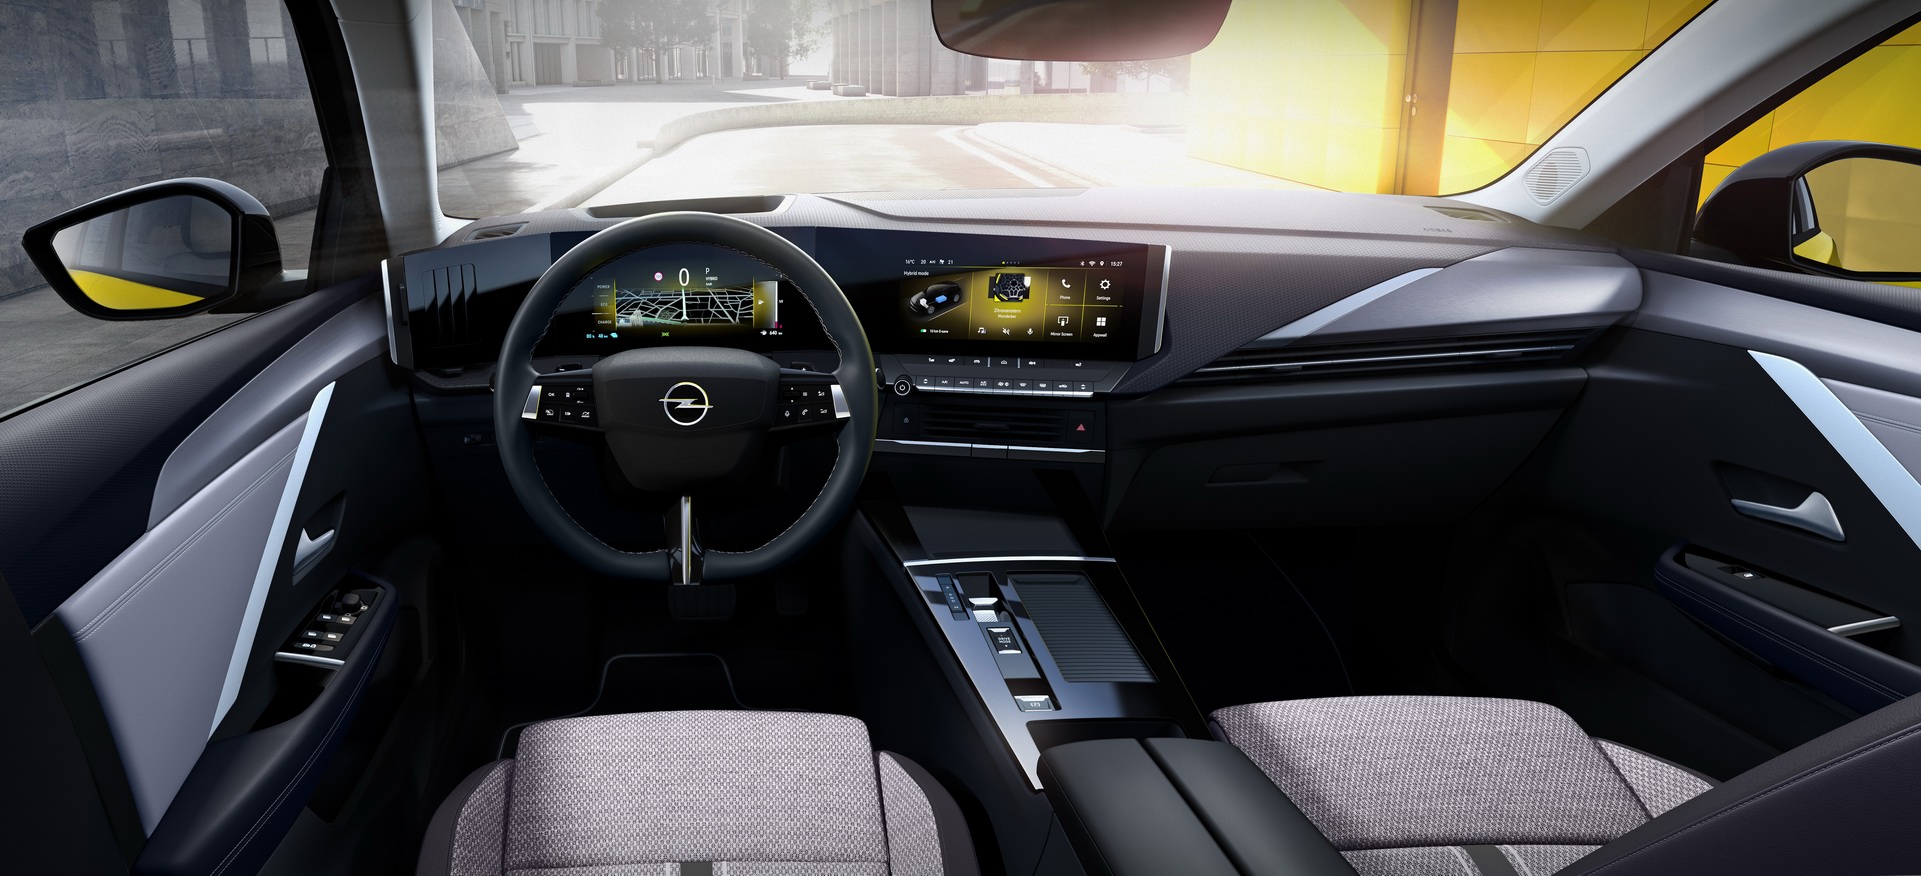 2022 Opel Astra Interior Cockpit Wallpapers #21 of 25